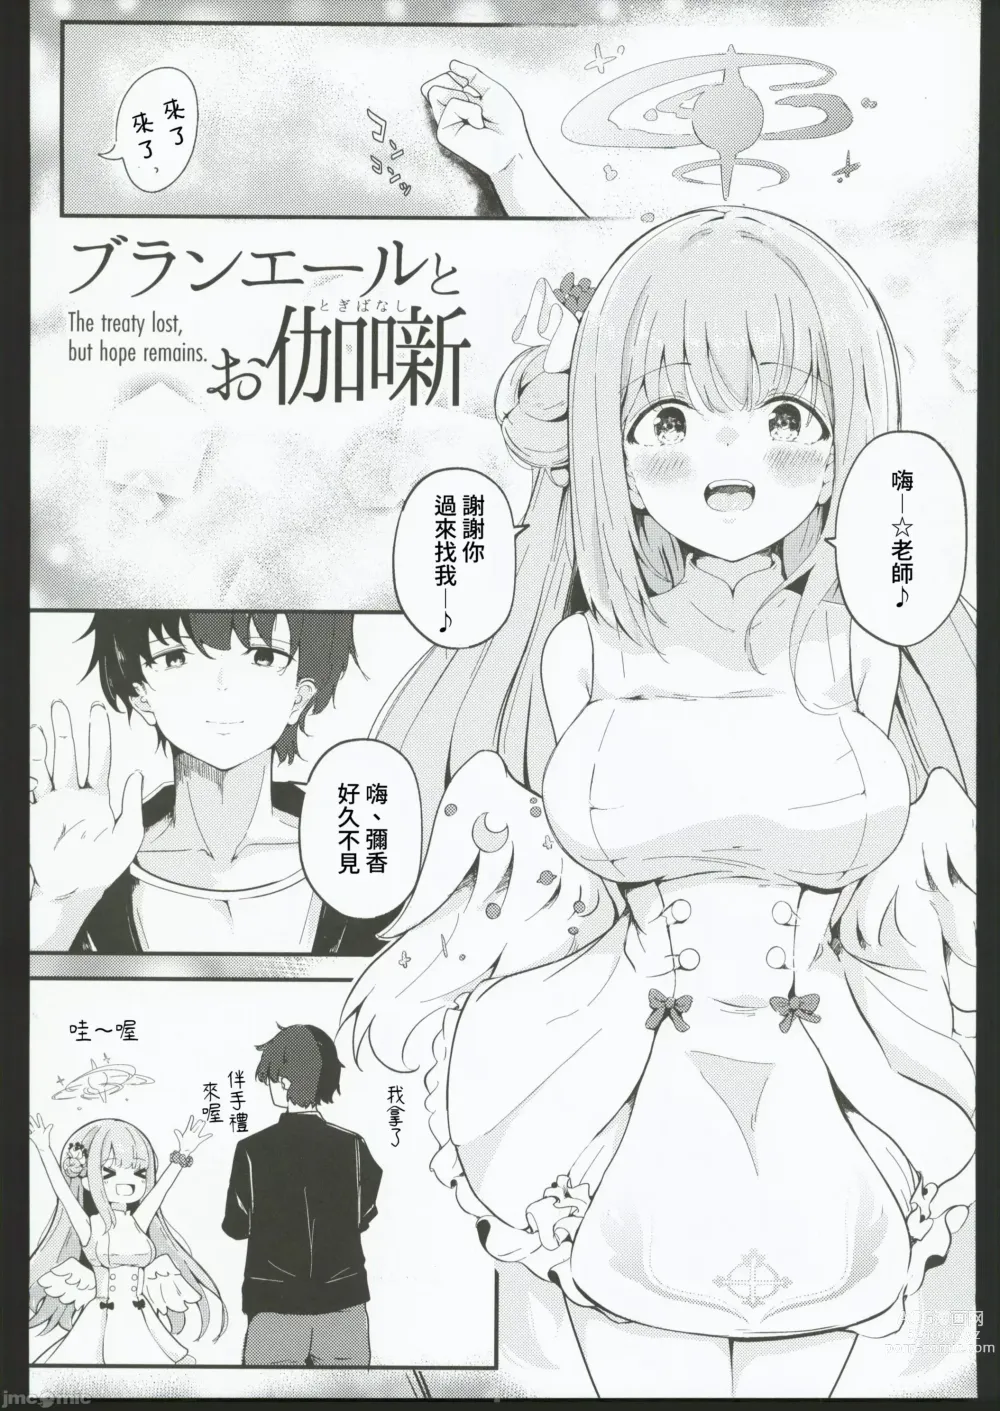 Page 6 of doujinshi Blanc Aile to Otogibanashi - The treaty lost, but hope remains.